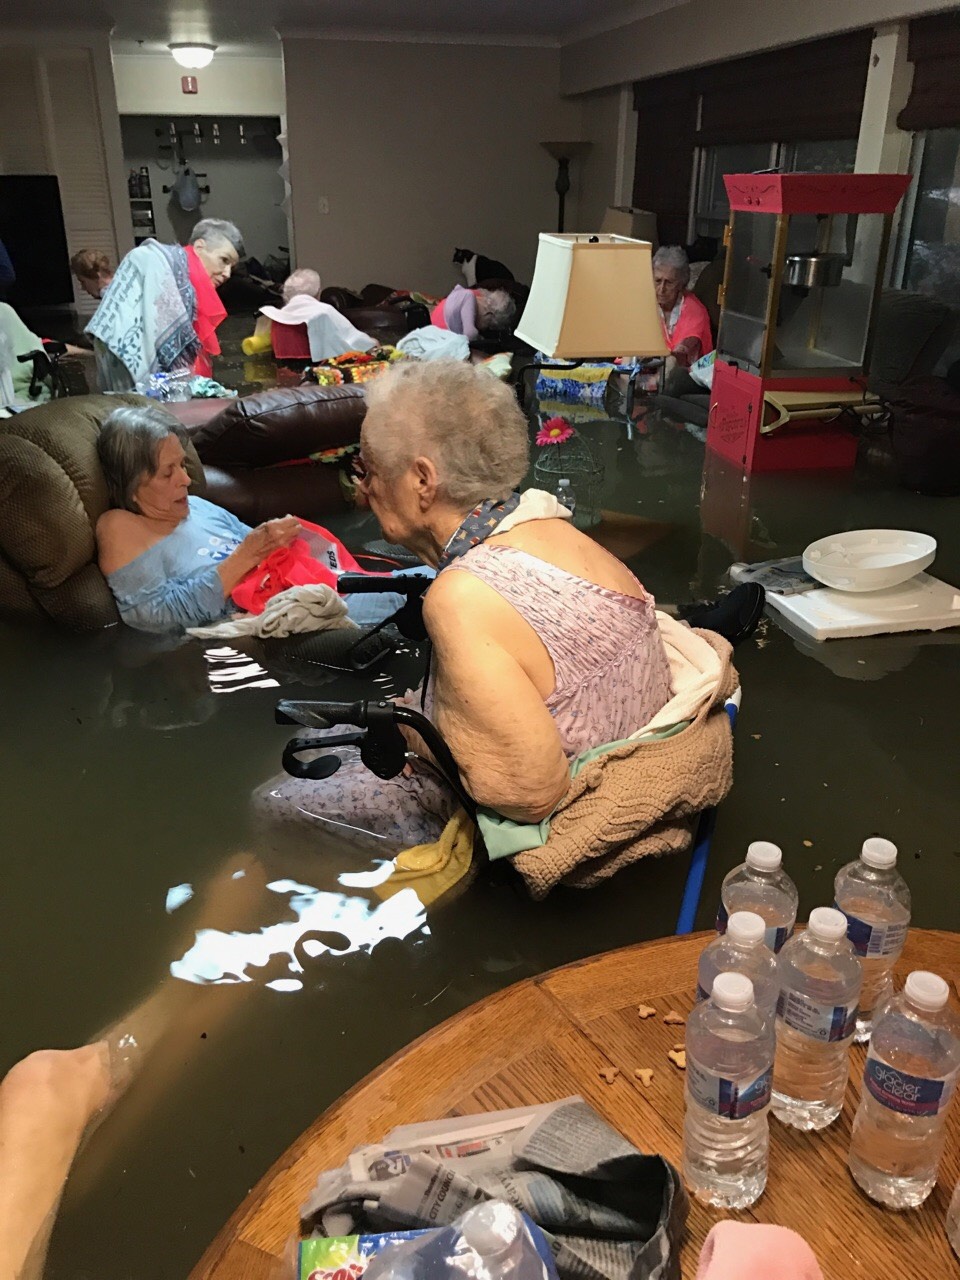 Going viral can actually help. Take for example this photo of an elderly woman legs vanished in the waist high as the flood waters overwhelmed a  La Vita Bella Nursing Home in Dickinson Texas due to Hurricane Harvey in August. The owners of the living center posted it to Twitter asking for help. Rescue teams answered with air lifts. It was one of the many ways people harnessed the power of social media after disaster hit this year. (Trudy Lampson)